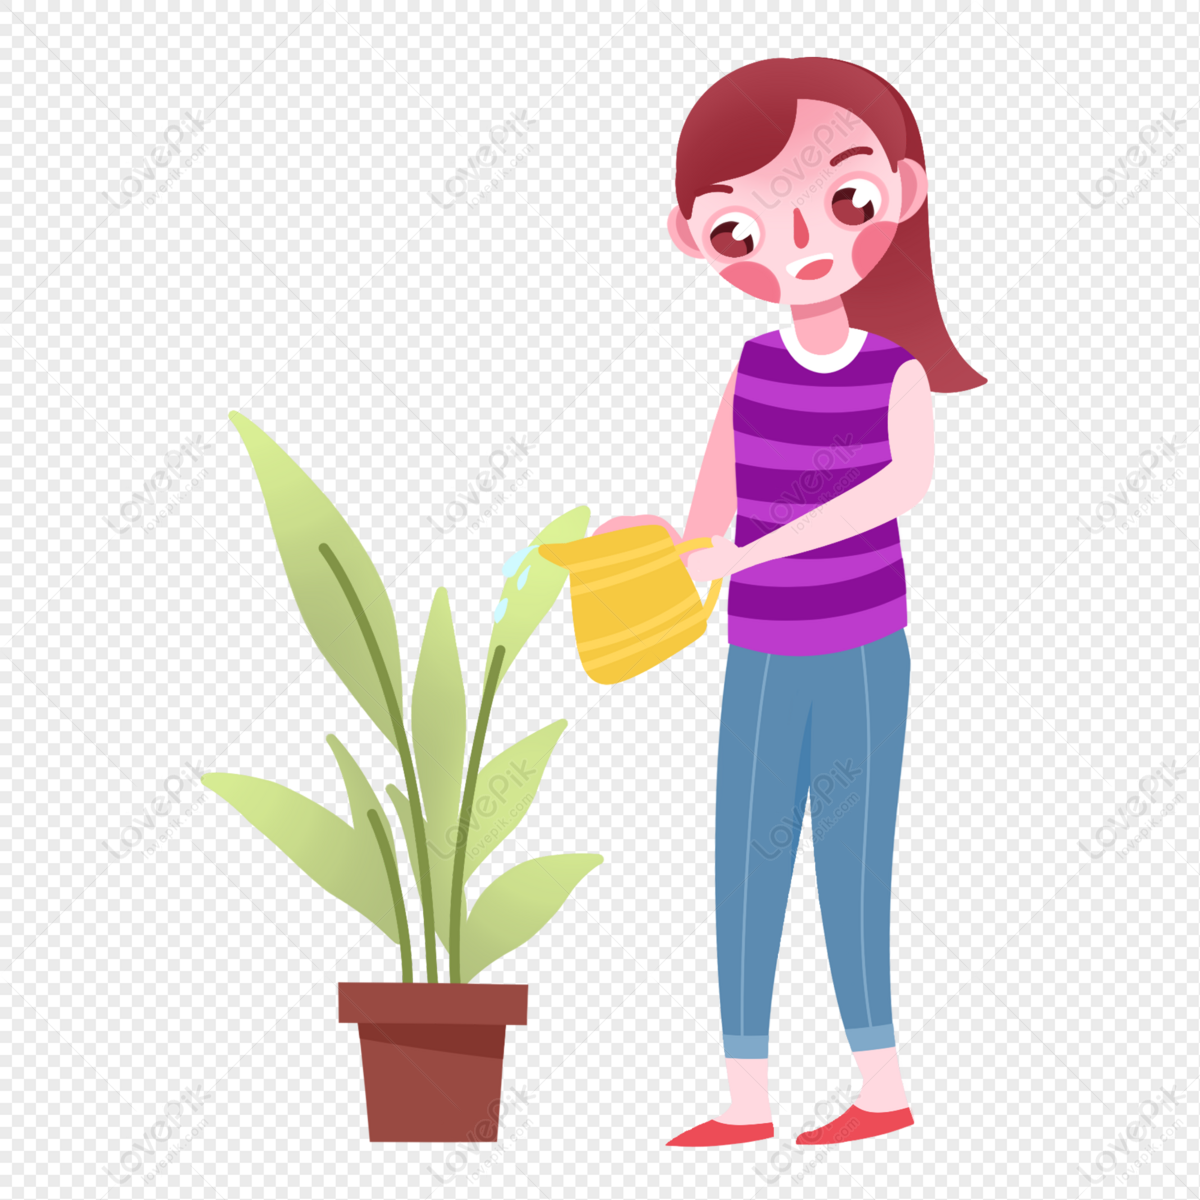 Watering Plants PNG Picture And Clipart Image For Free Download - Lovepik |  401479345